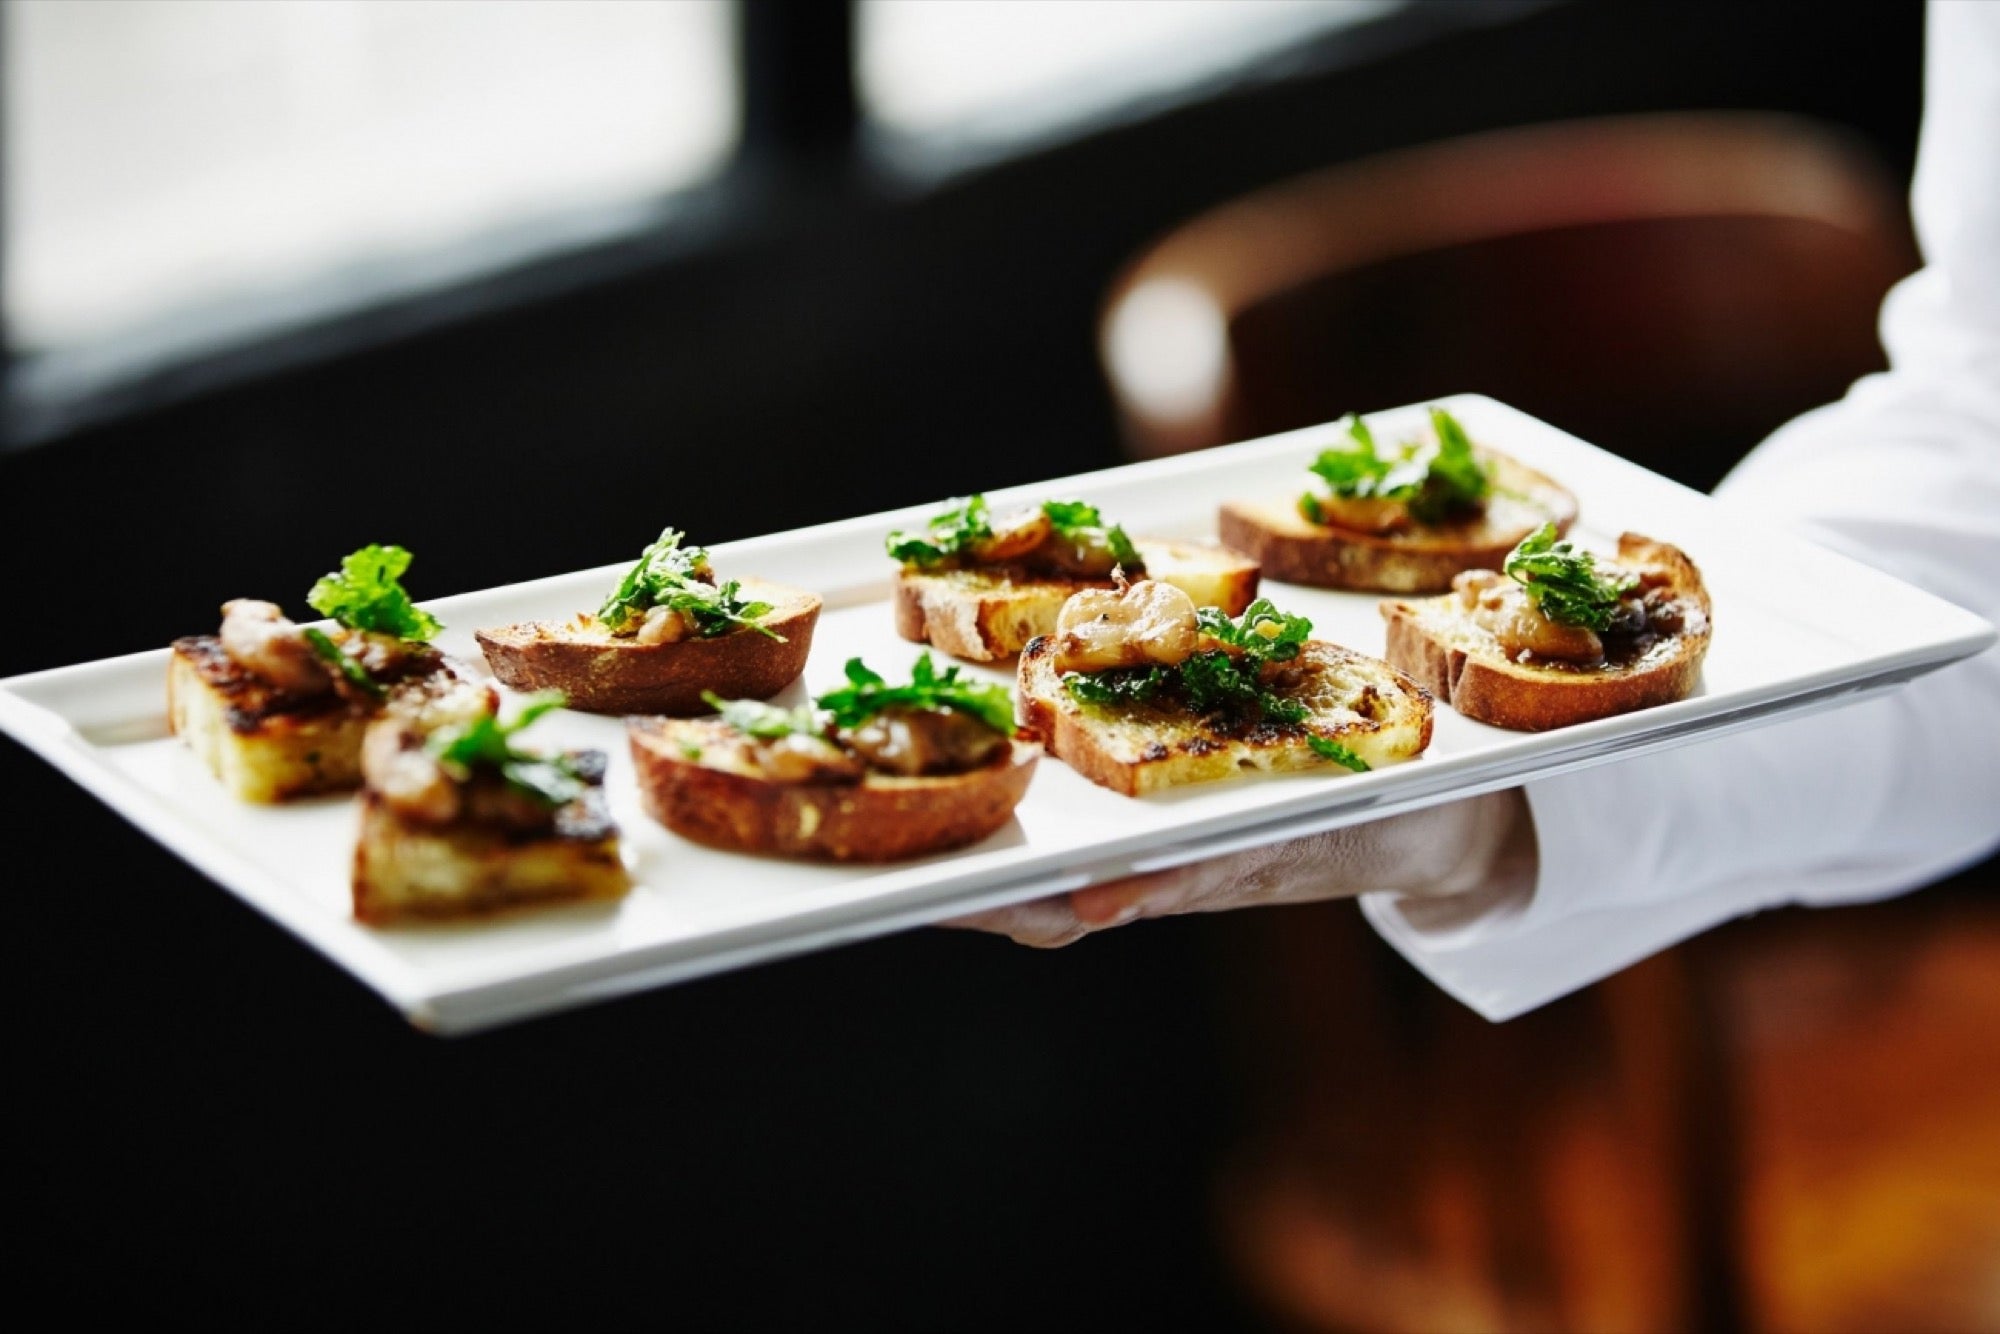 What You Need to Know Before Starting a Catering Business